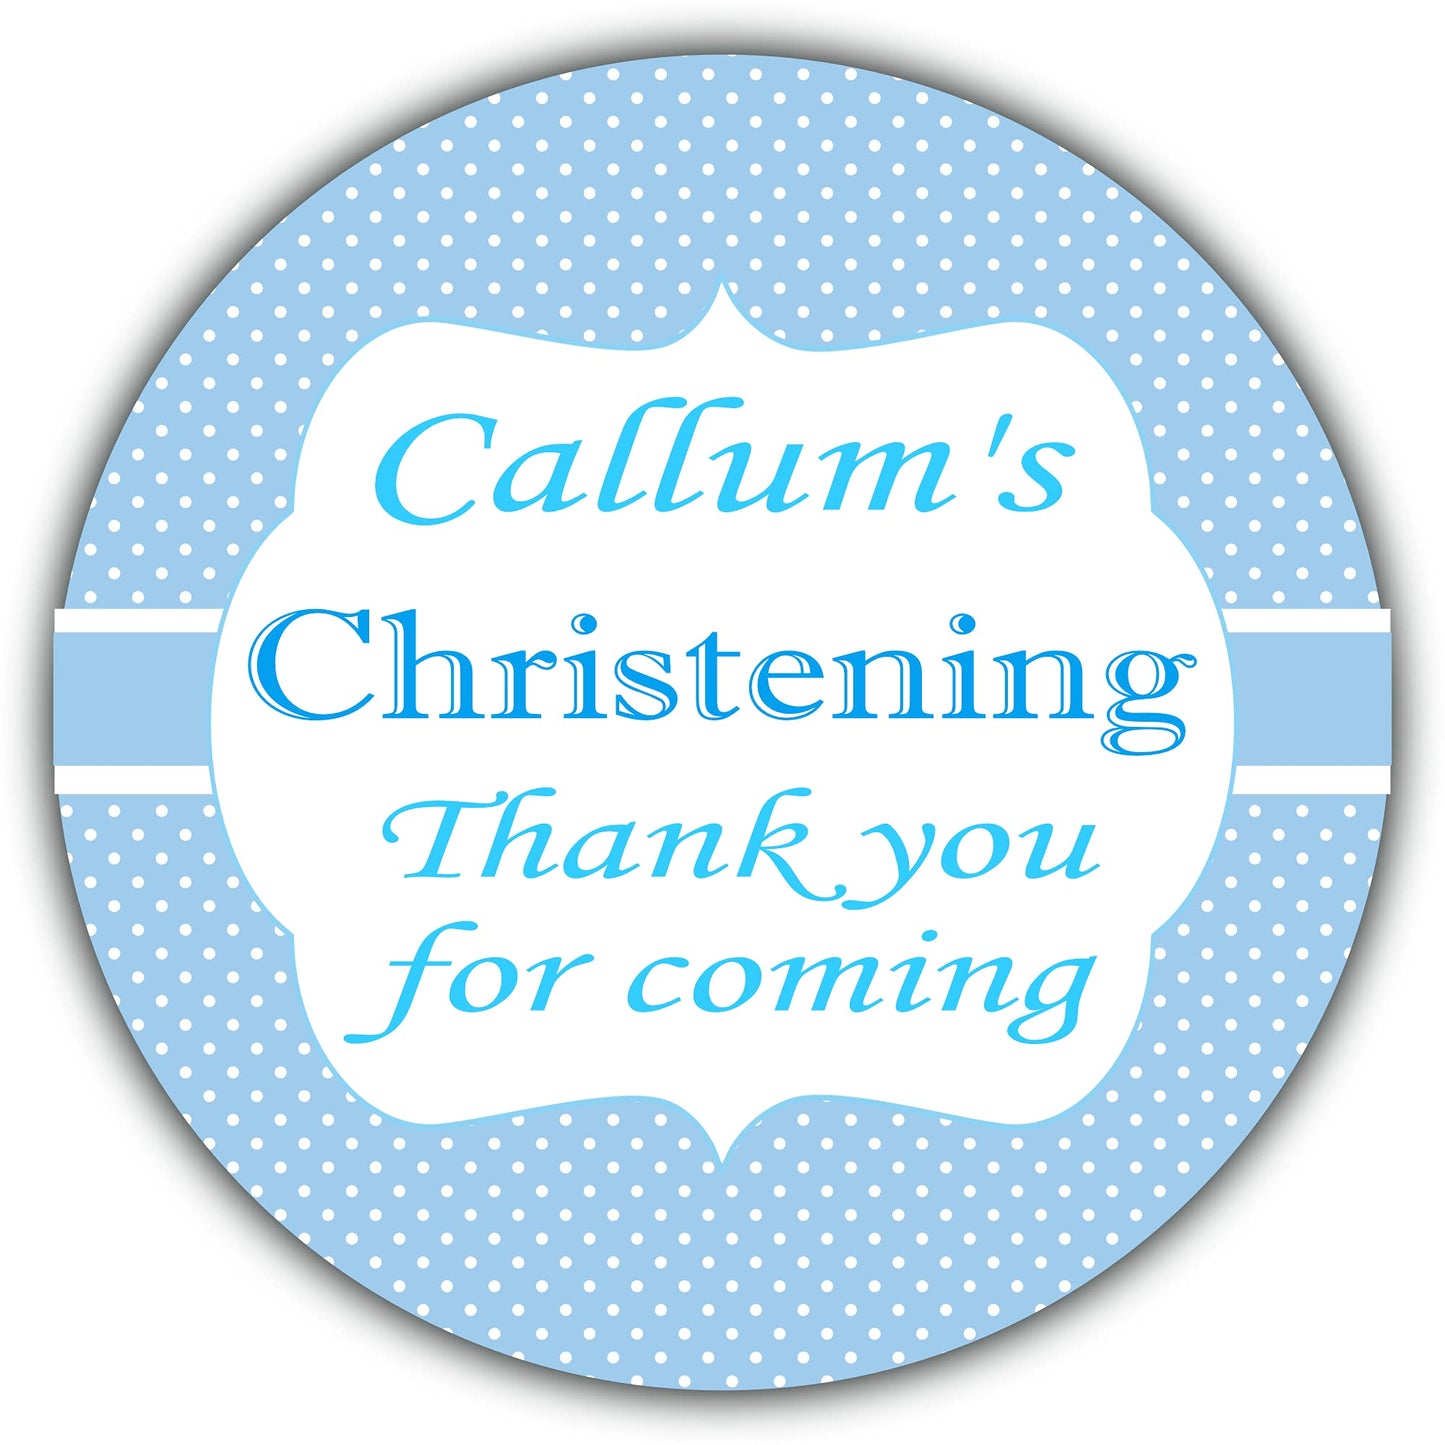 Personalised Christening Party Stickers